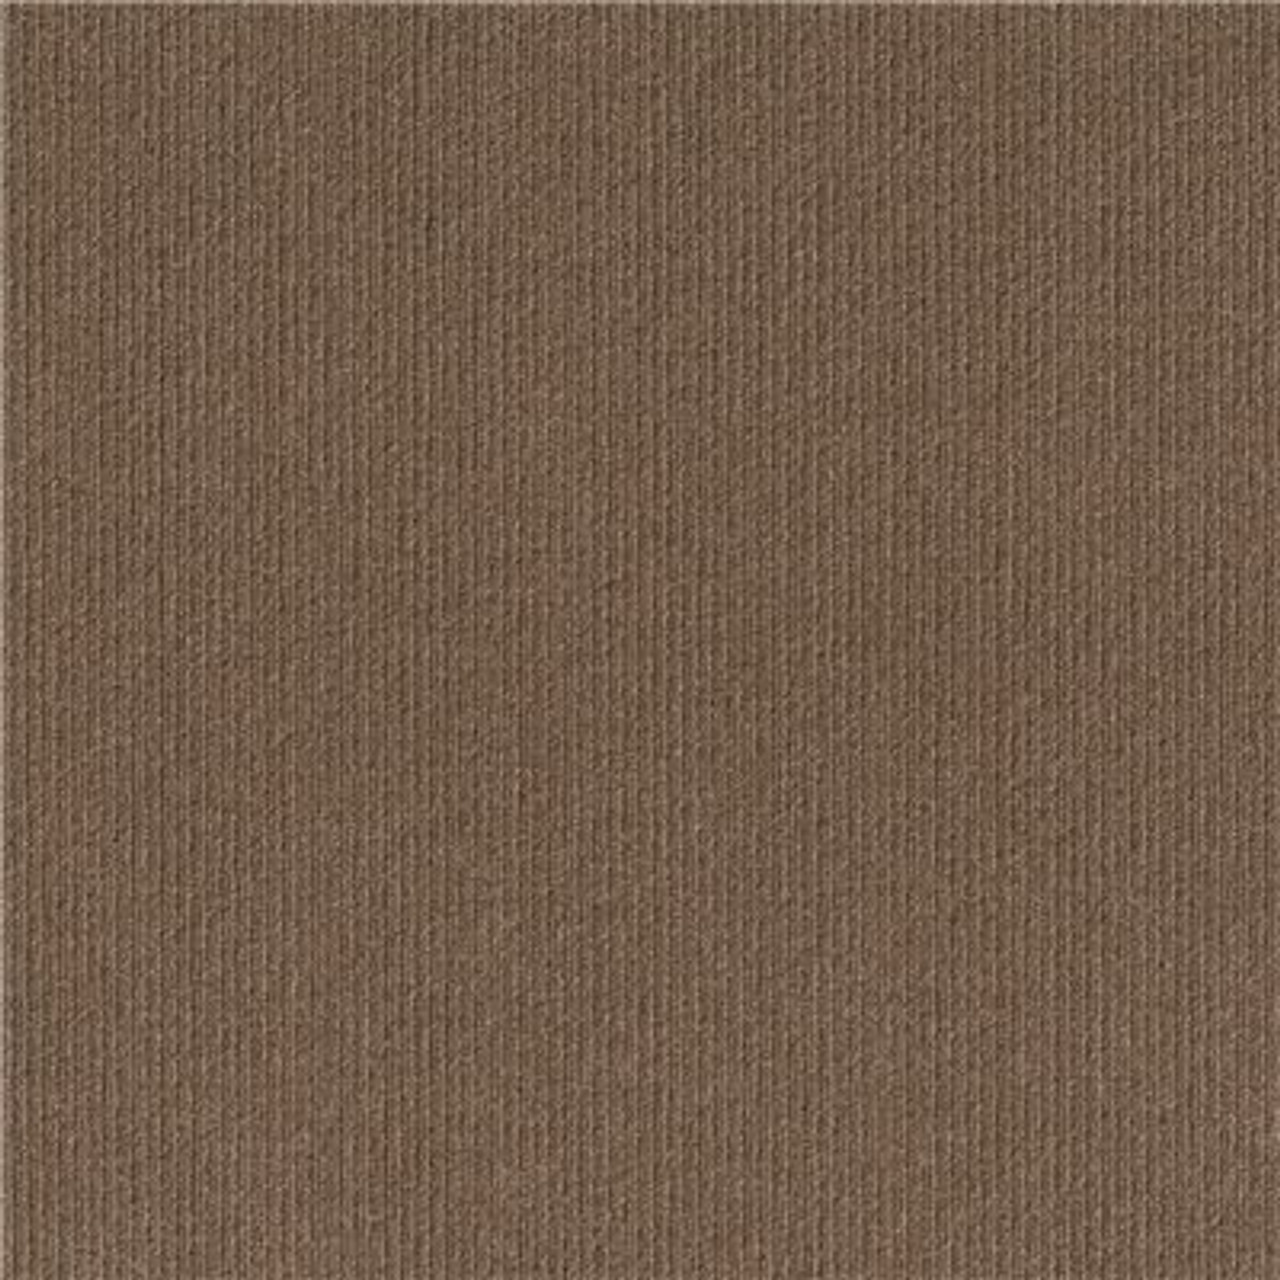 Foss Peel And Stick First Impressions High Low Espresso 24 In. X 24 In. Commercial Carpet Tile (15-Tile / Case)